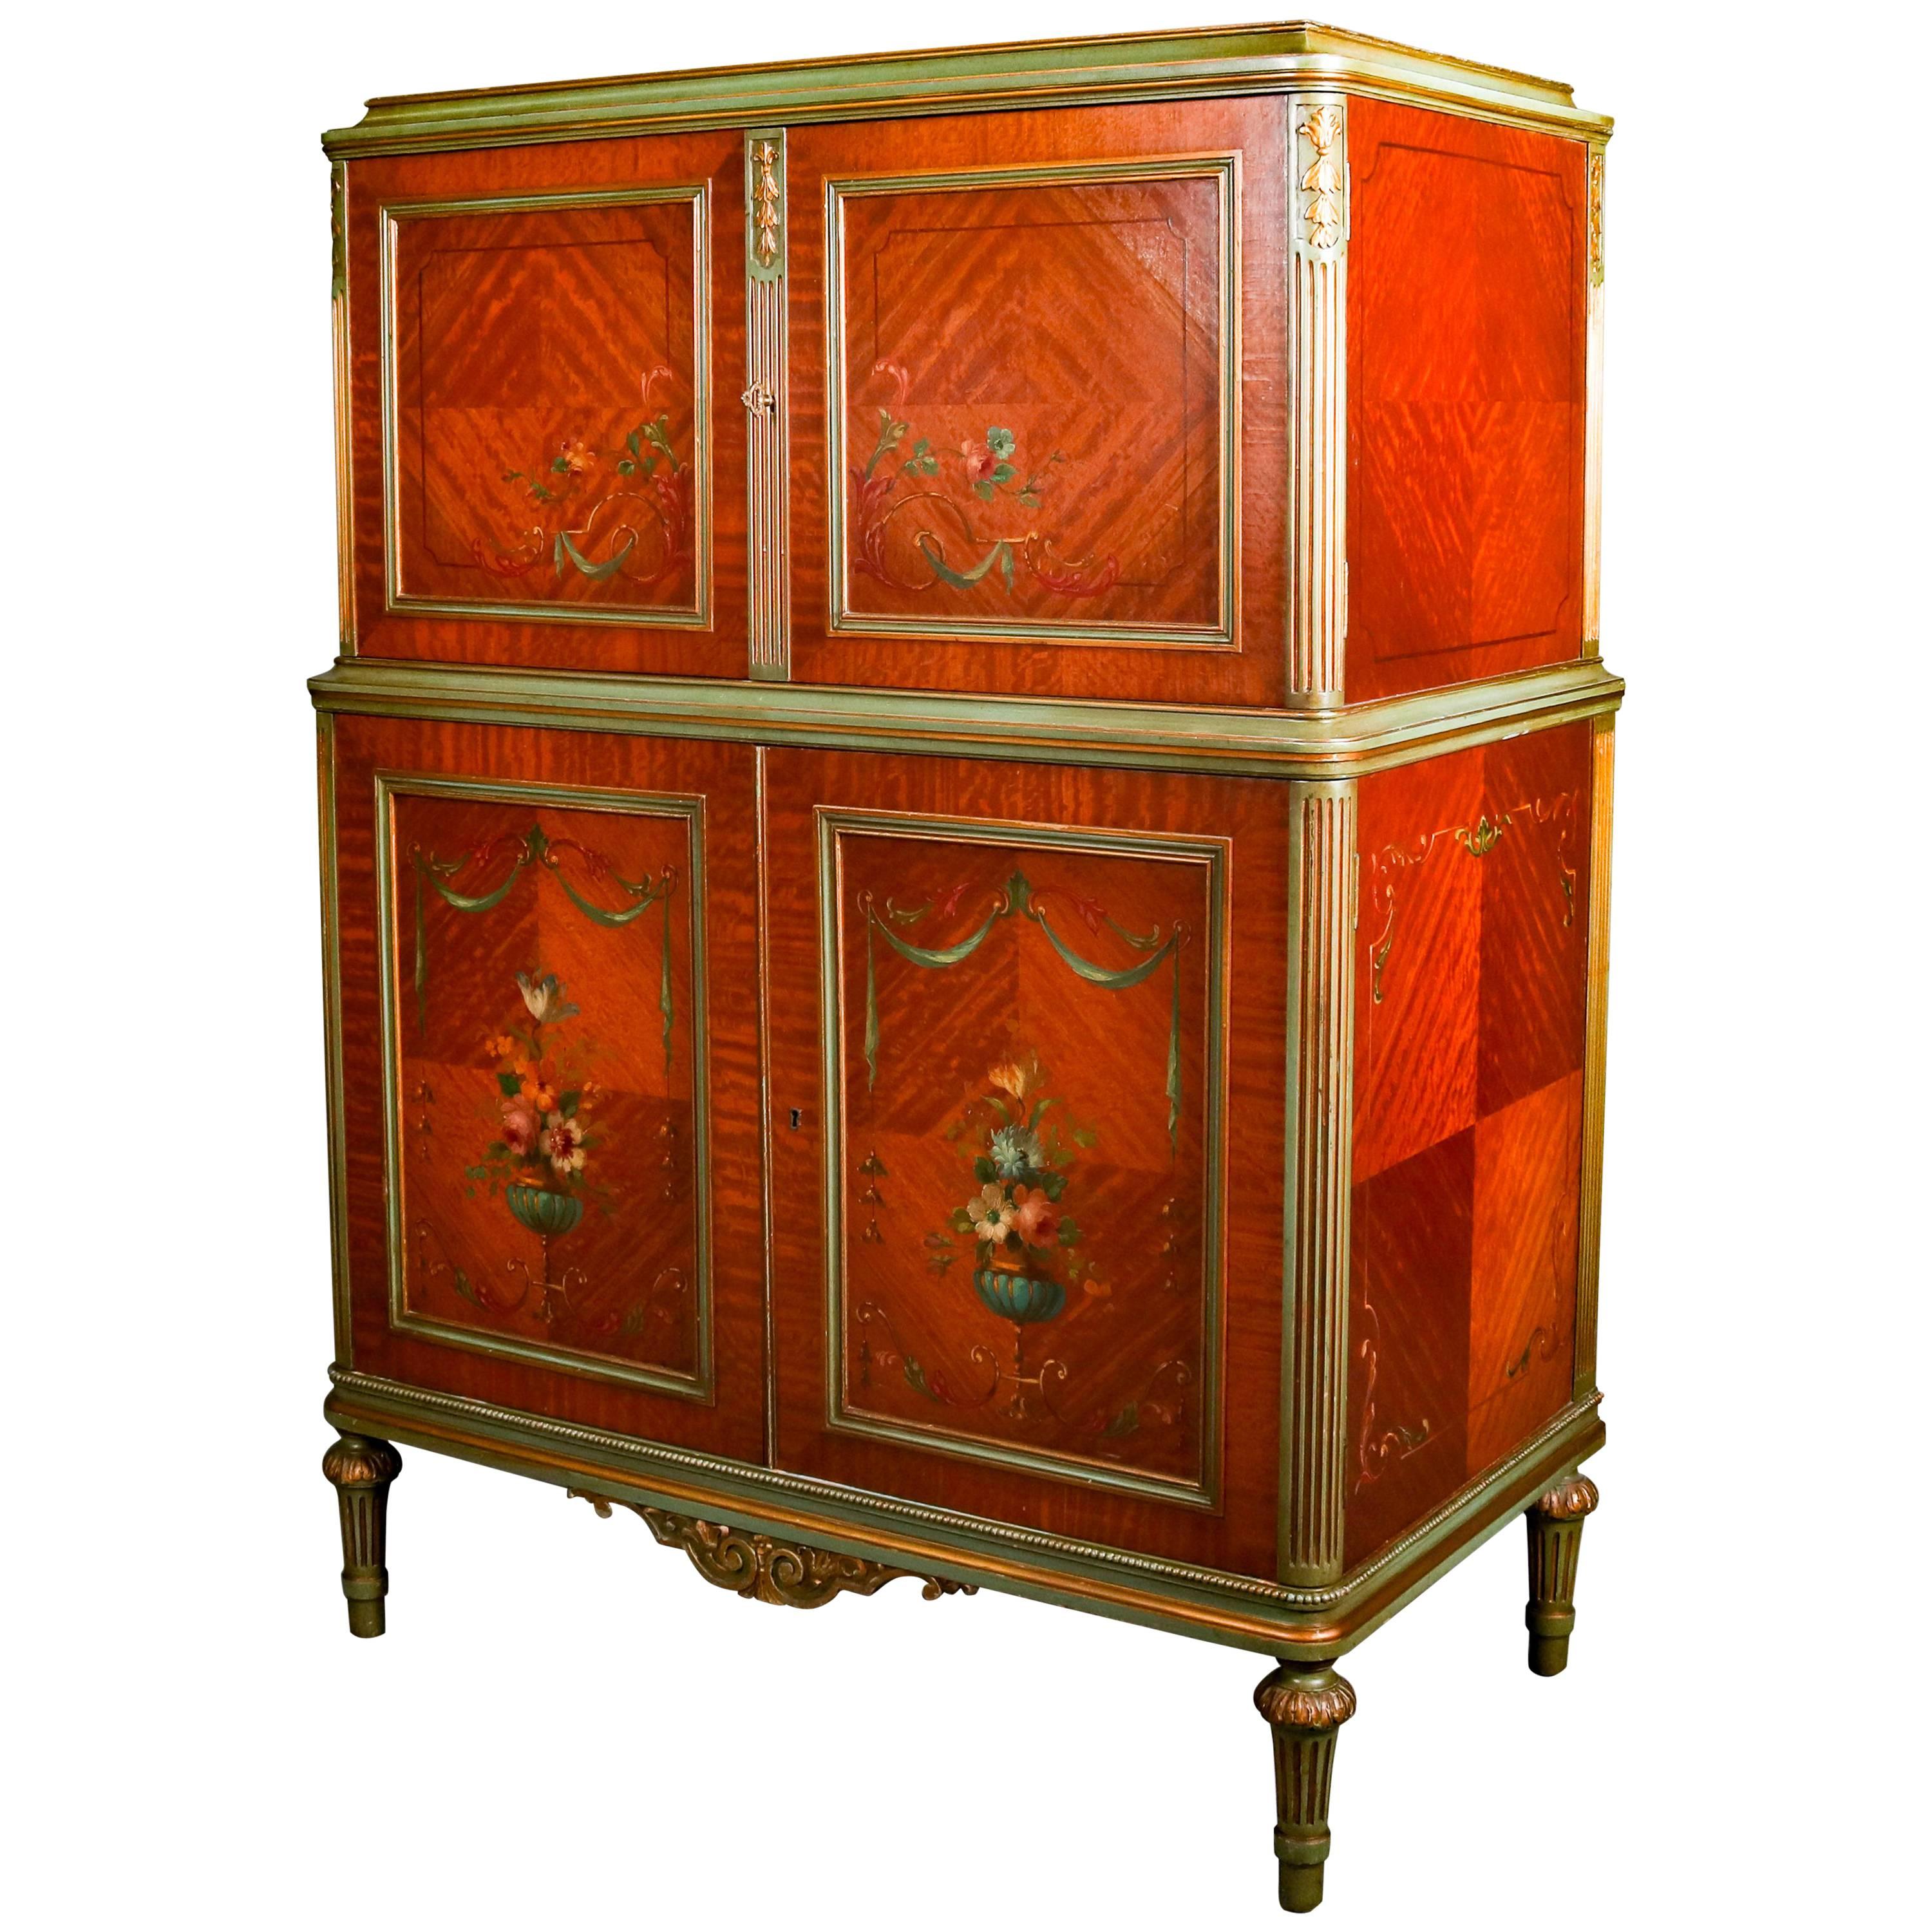 Antique Adam Style Classical Hand-Painted and Gilt Carved Satinwood High Chest